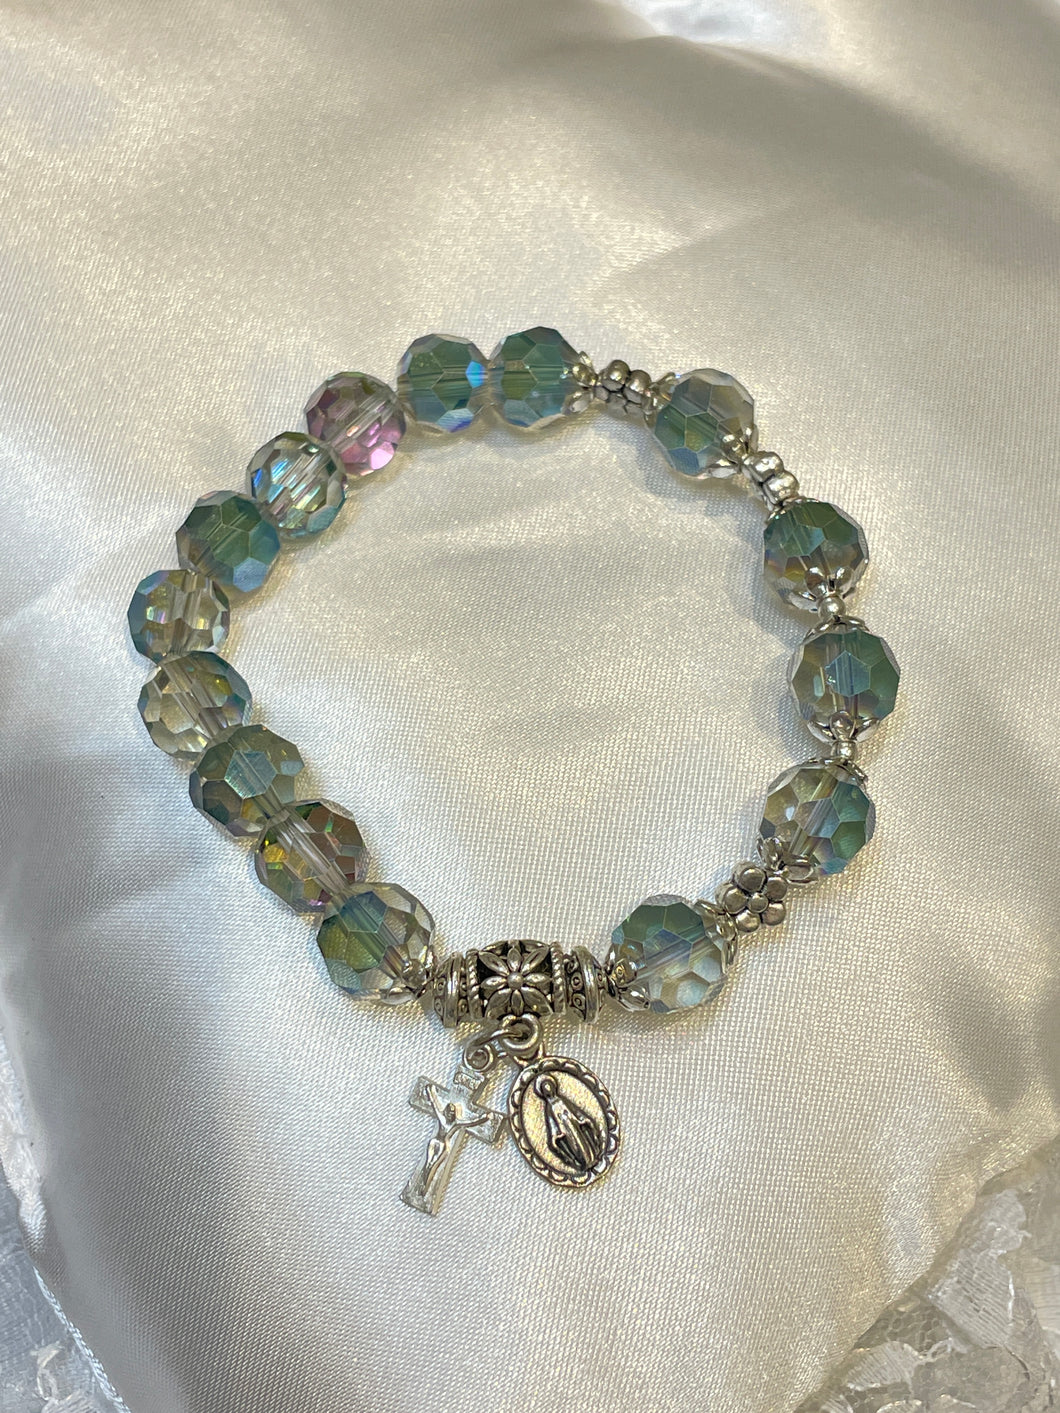 Teal Crystal Rosary Bracelet with Miraculous Medal and Crucifix Charms